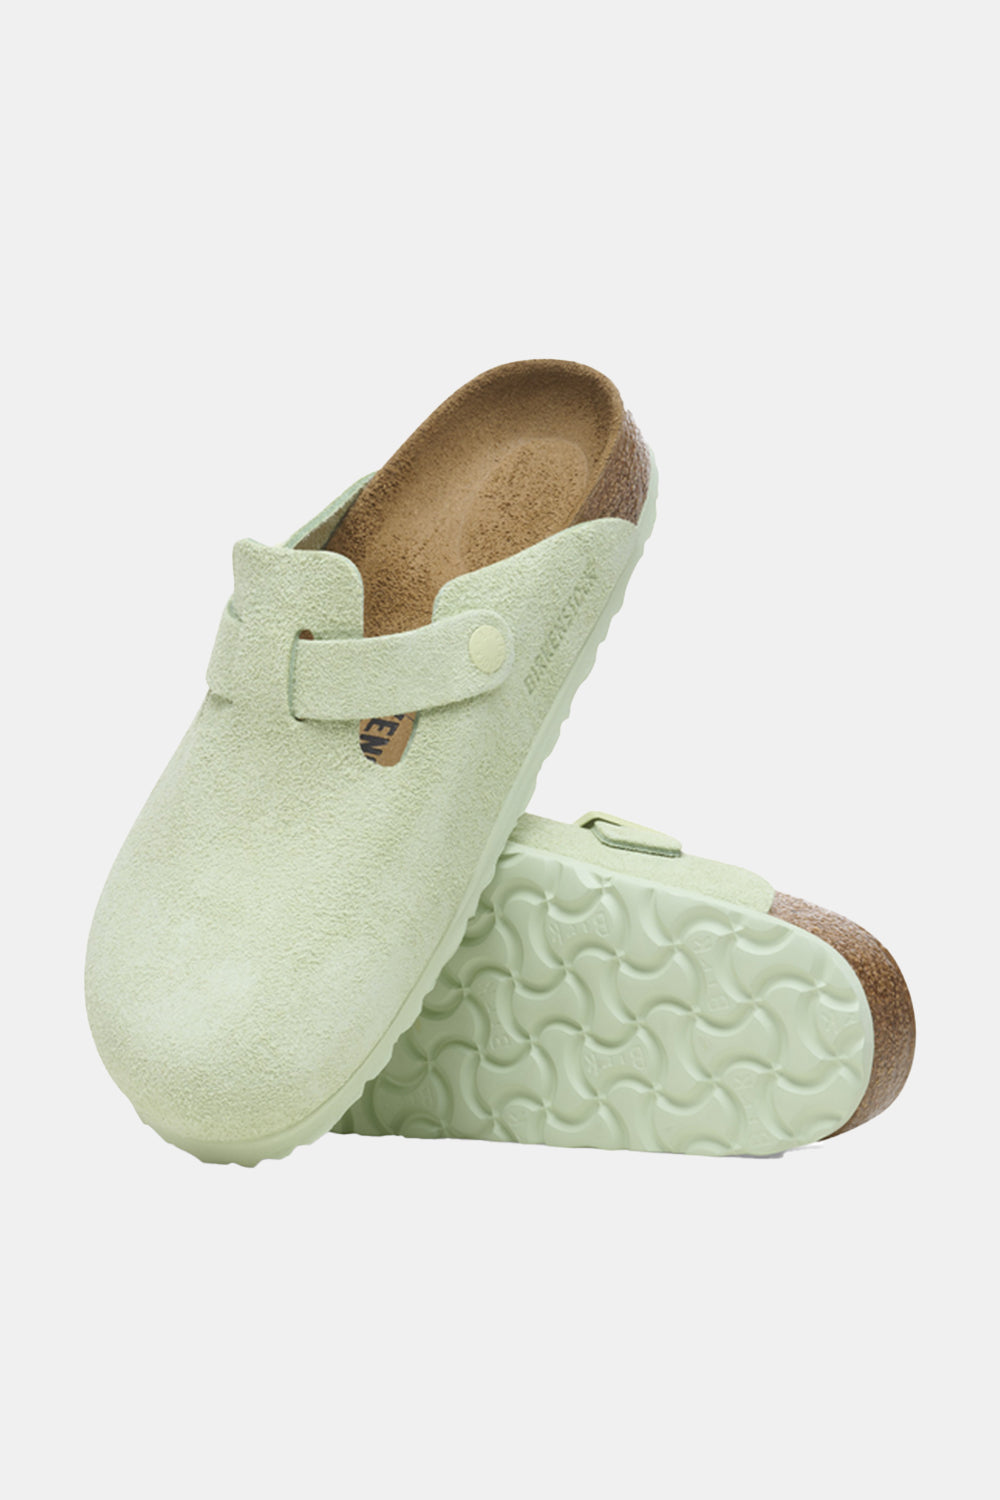 Birkenstock Boston BS Suede Leather (Faded Lime)